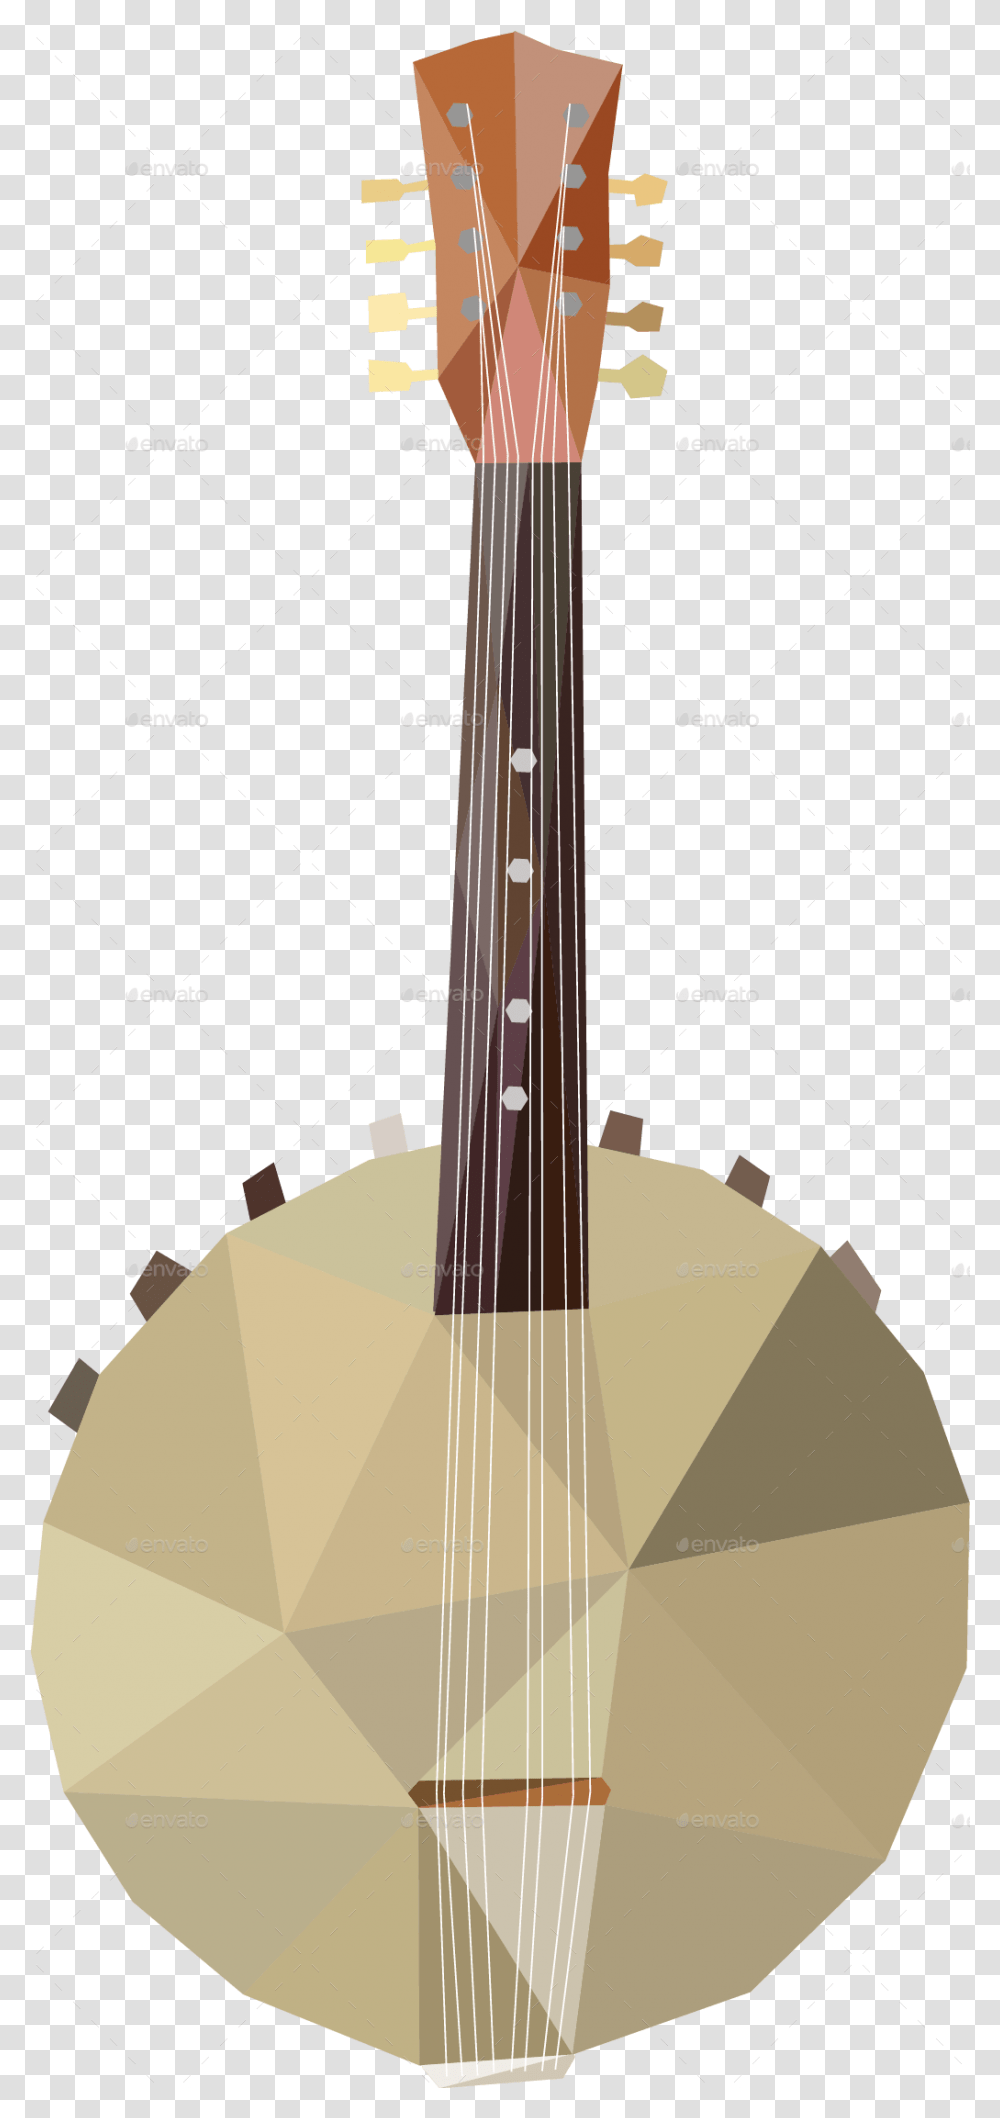 Music Instruments In Low Poly Art Traditional Japanese Musical Instruments, Lute, Leisure Activities, Mandolin, Guitar Transparent Png